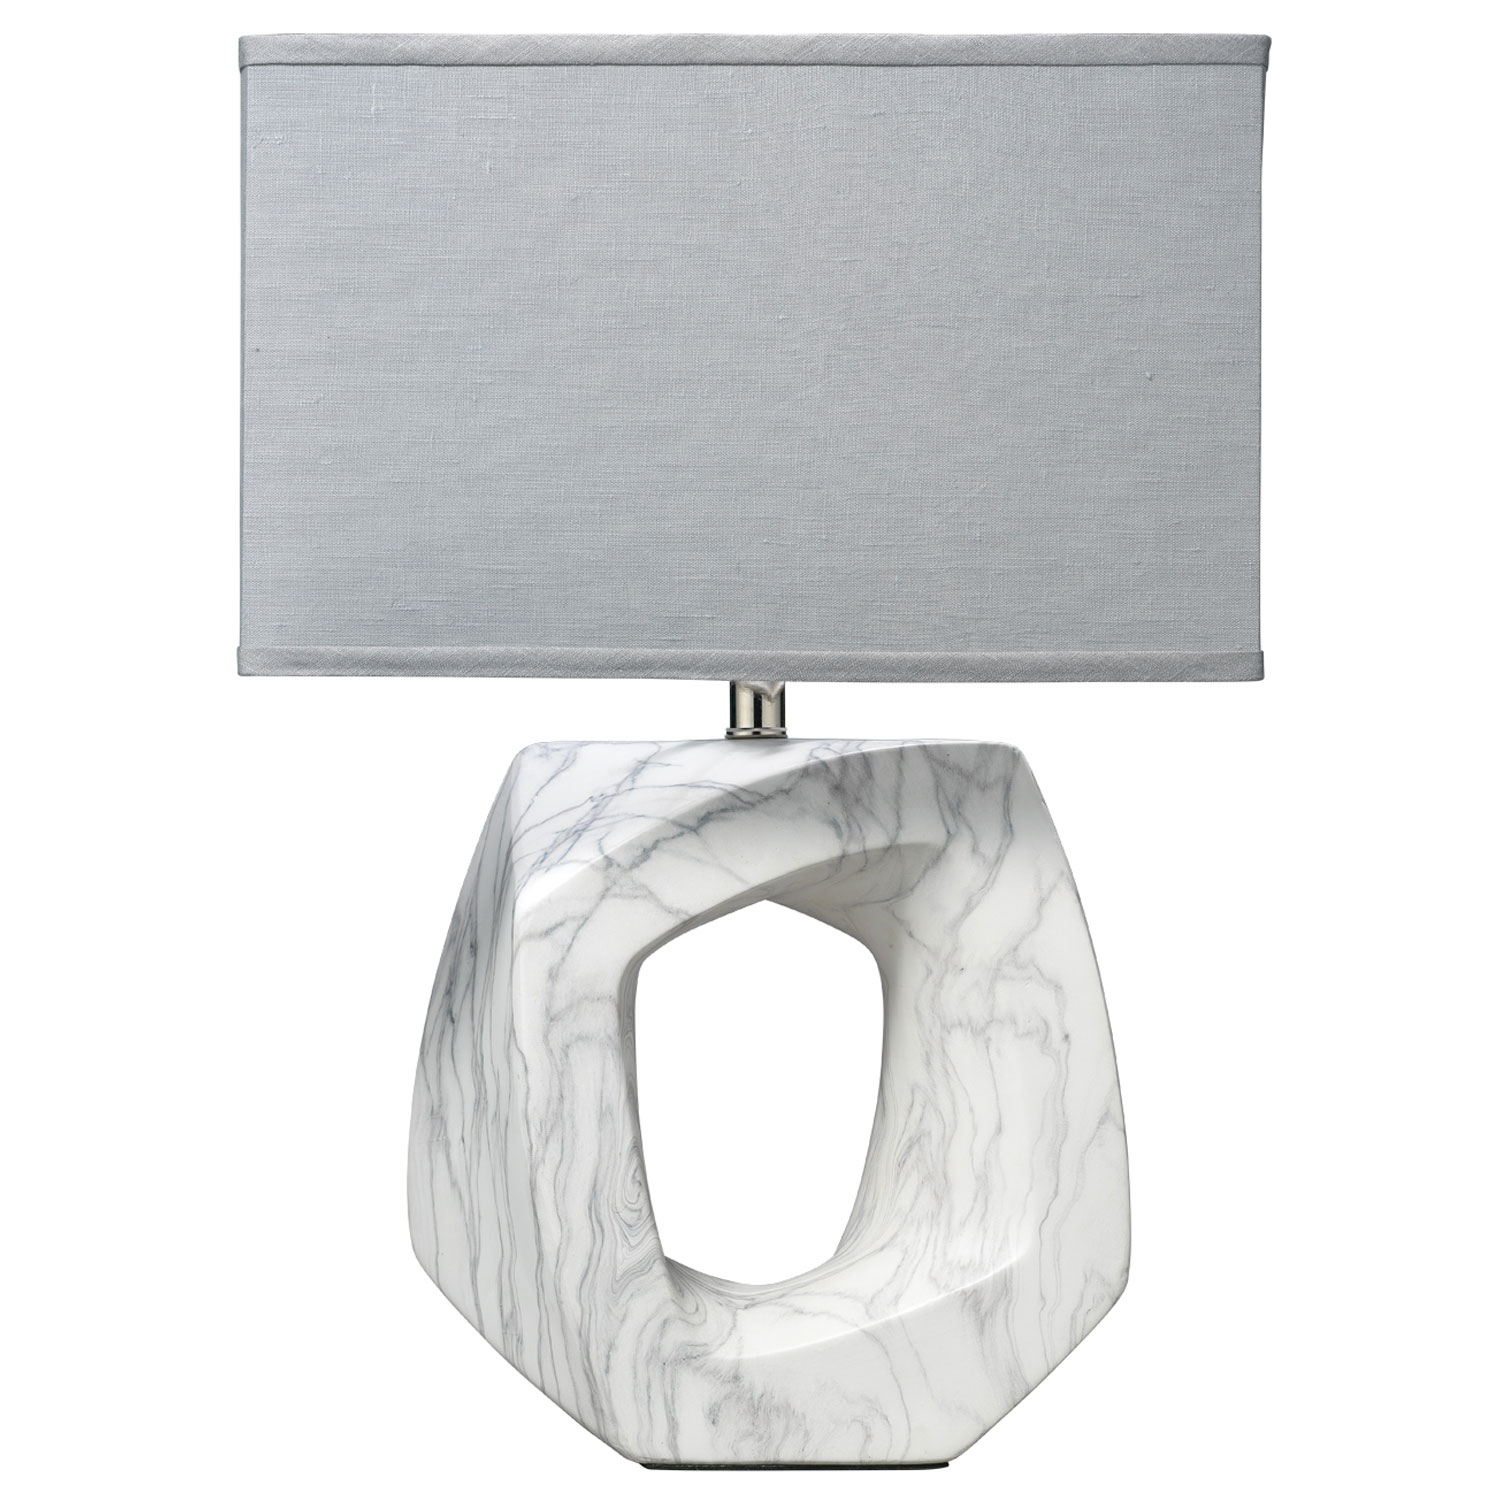 jamie young company quarry marbled ceramic one light table lamp accent hover zoom placemats shelby chest home office decor ideas best items fine furniture edmonton college dorm